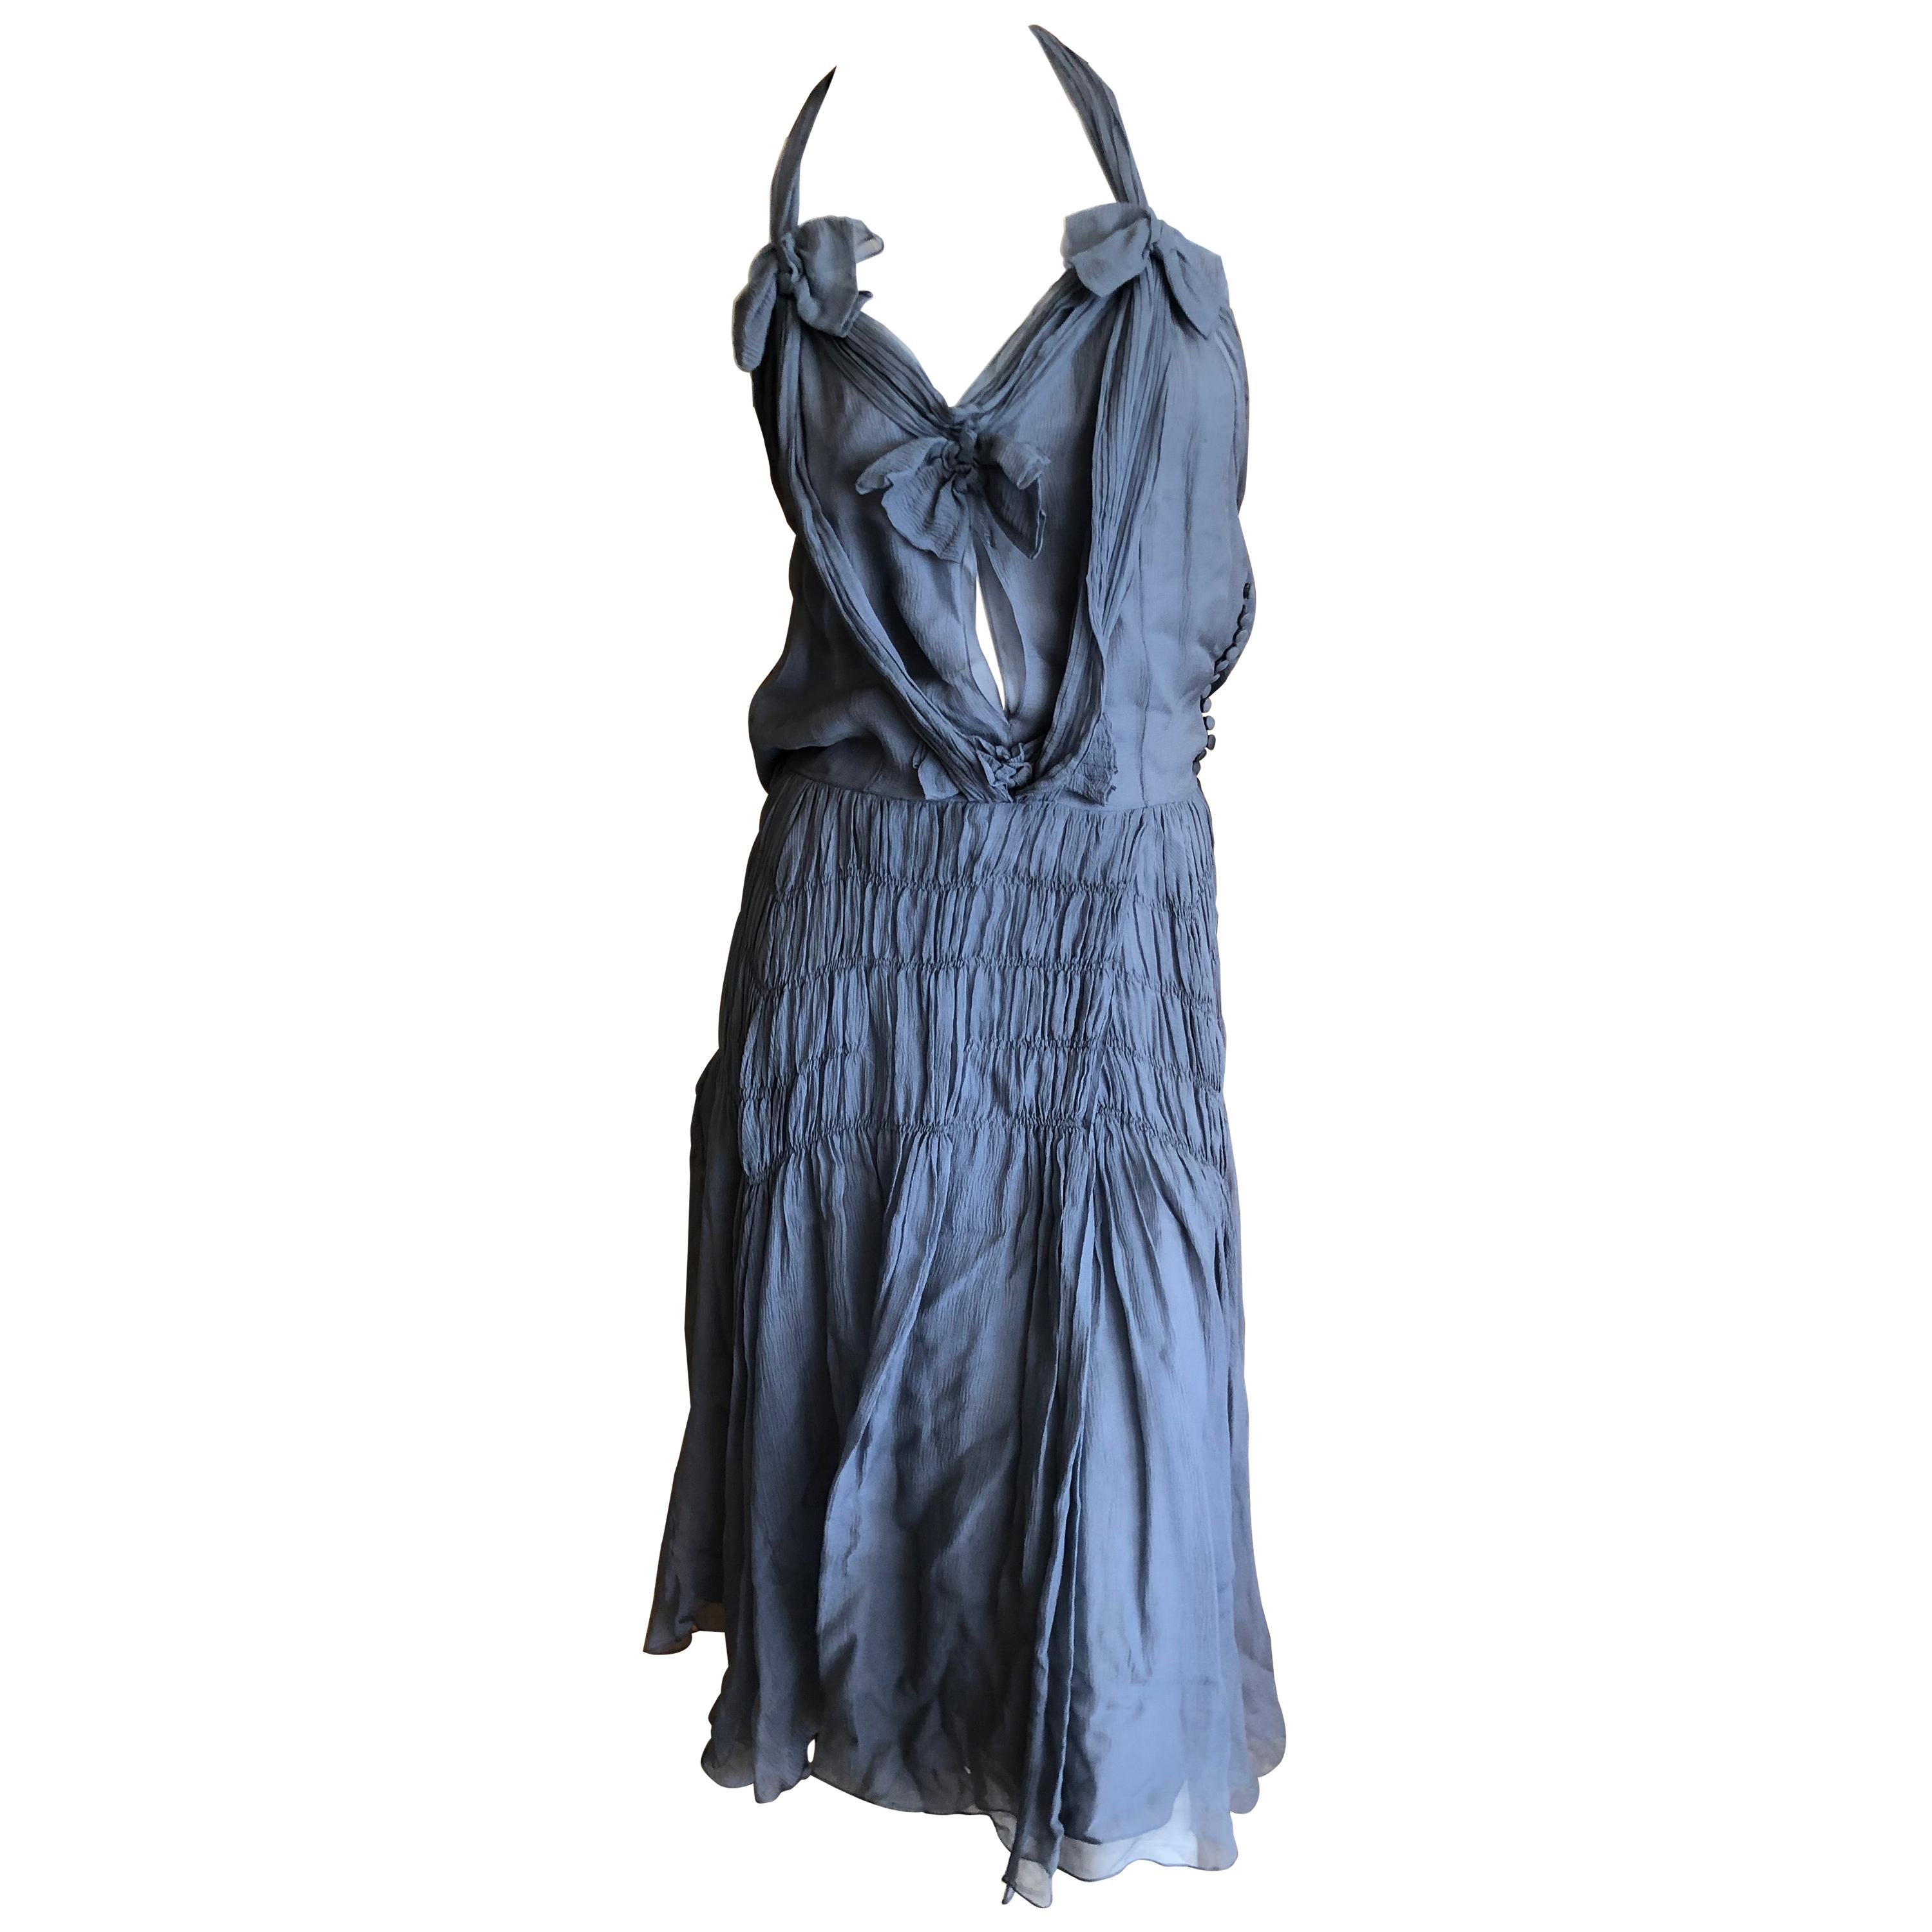 Christian Dior by John Galliano Gray SIlk Dress with Bows For Sale